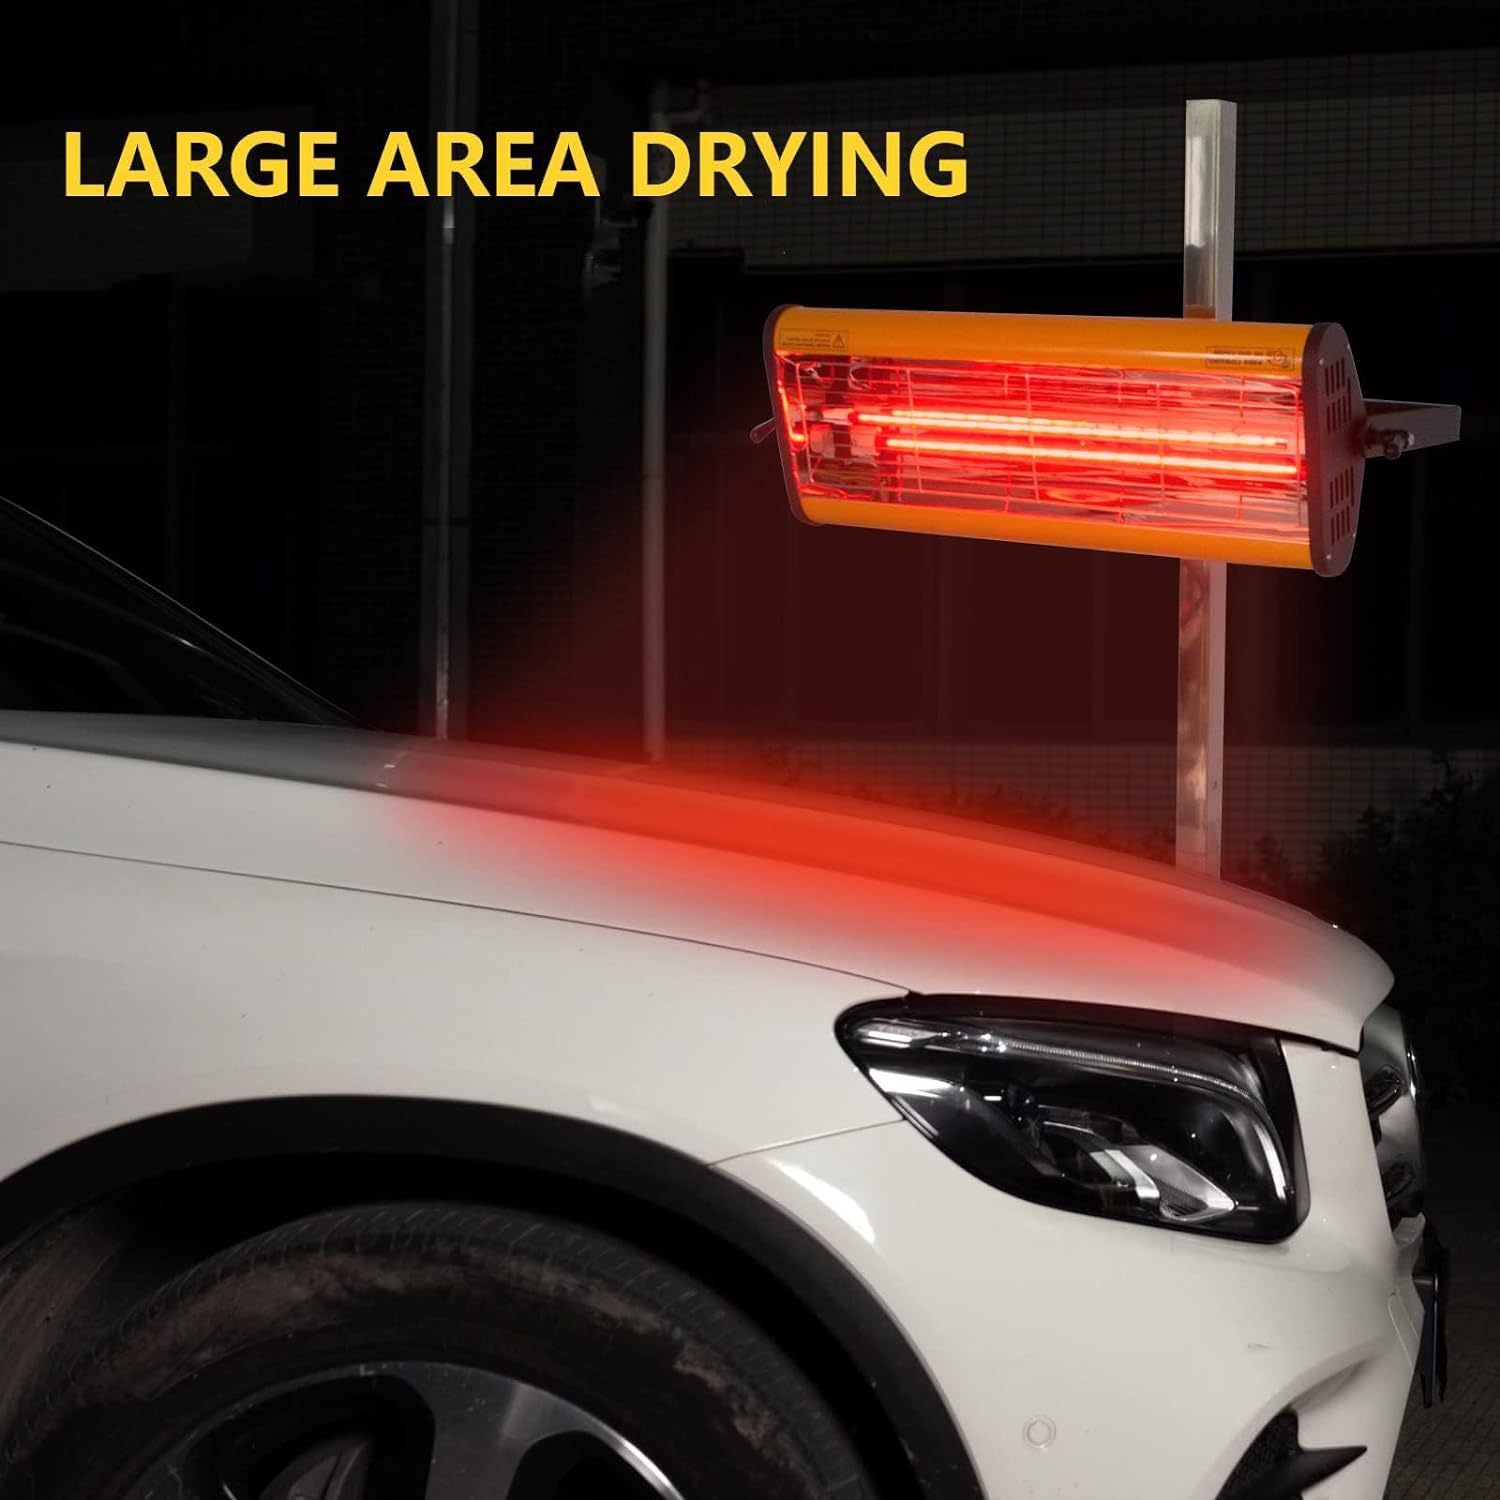 Solary Infrared Paint Curing Lamp, 1050W 110V Short Wave Infrared Heating Light for Car Bodywork Repair, Movable Paint Dryer with Stand - Auto Body Collision Repair Welding Products